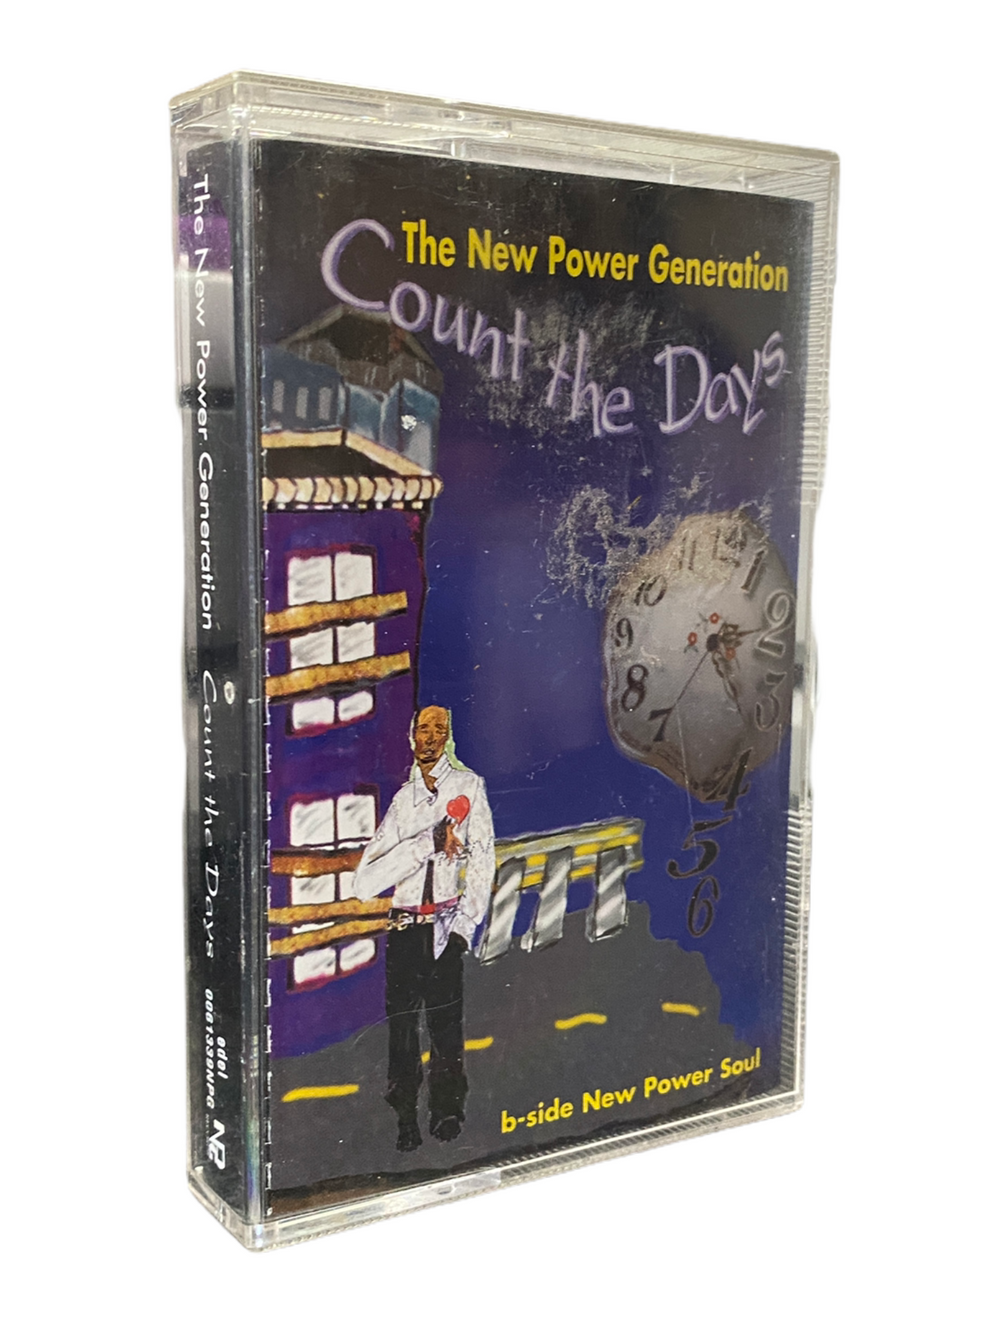 Prince – The New Power Generation - Count The Days Original Tape Cassette Single Release